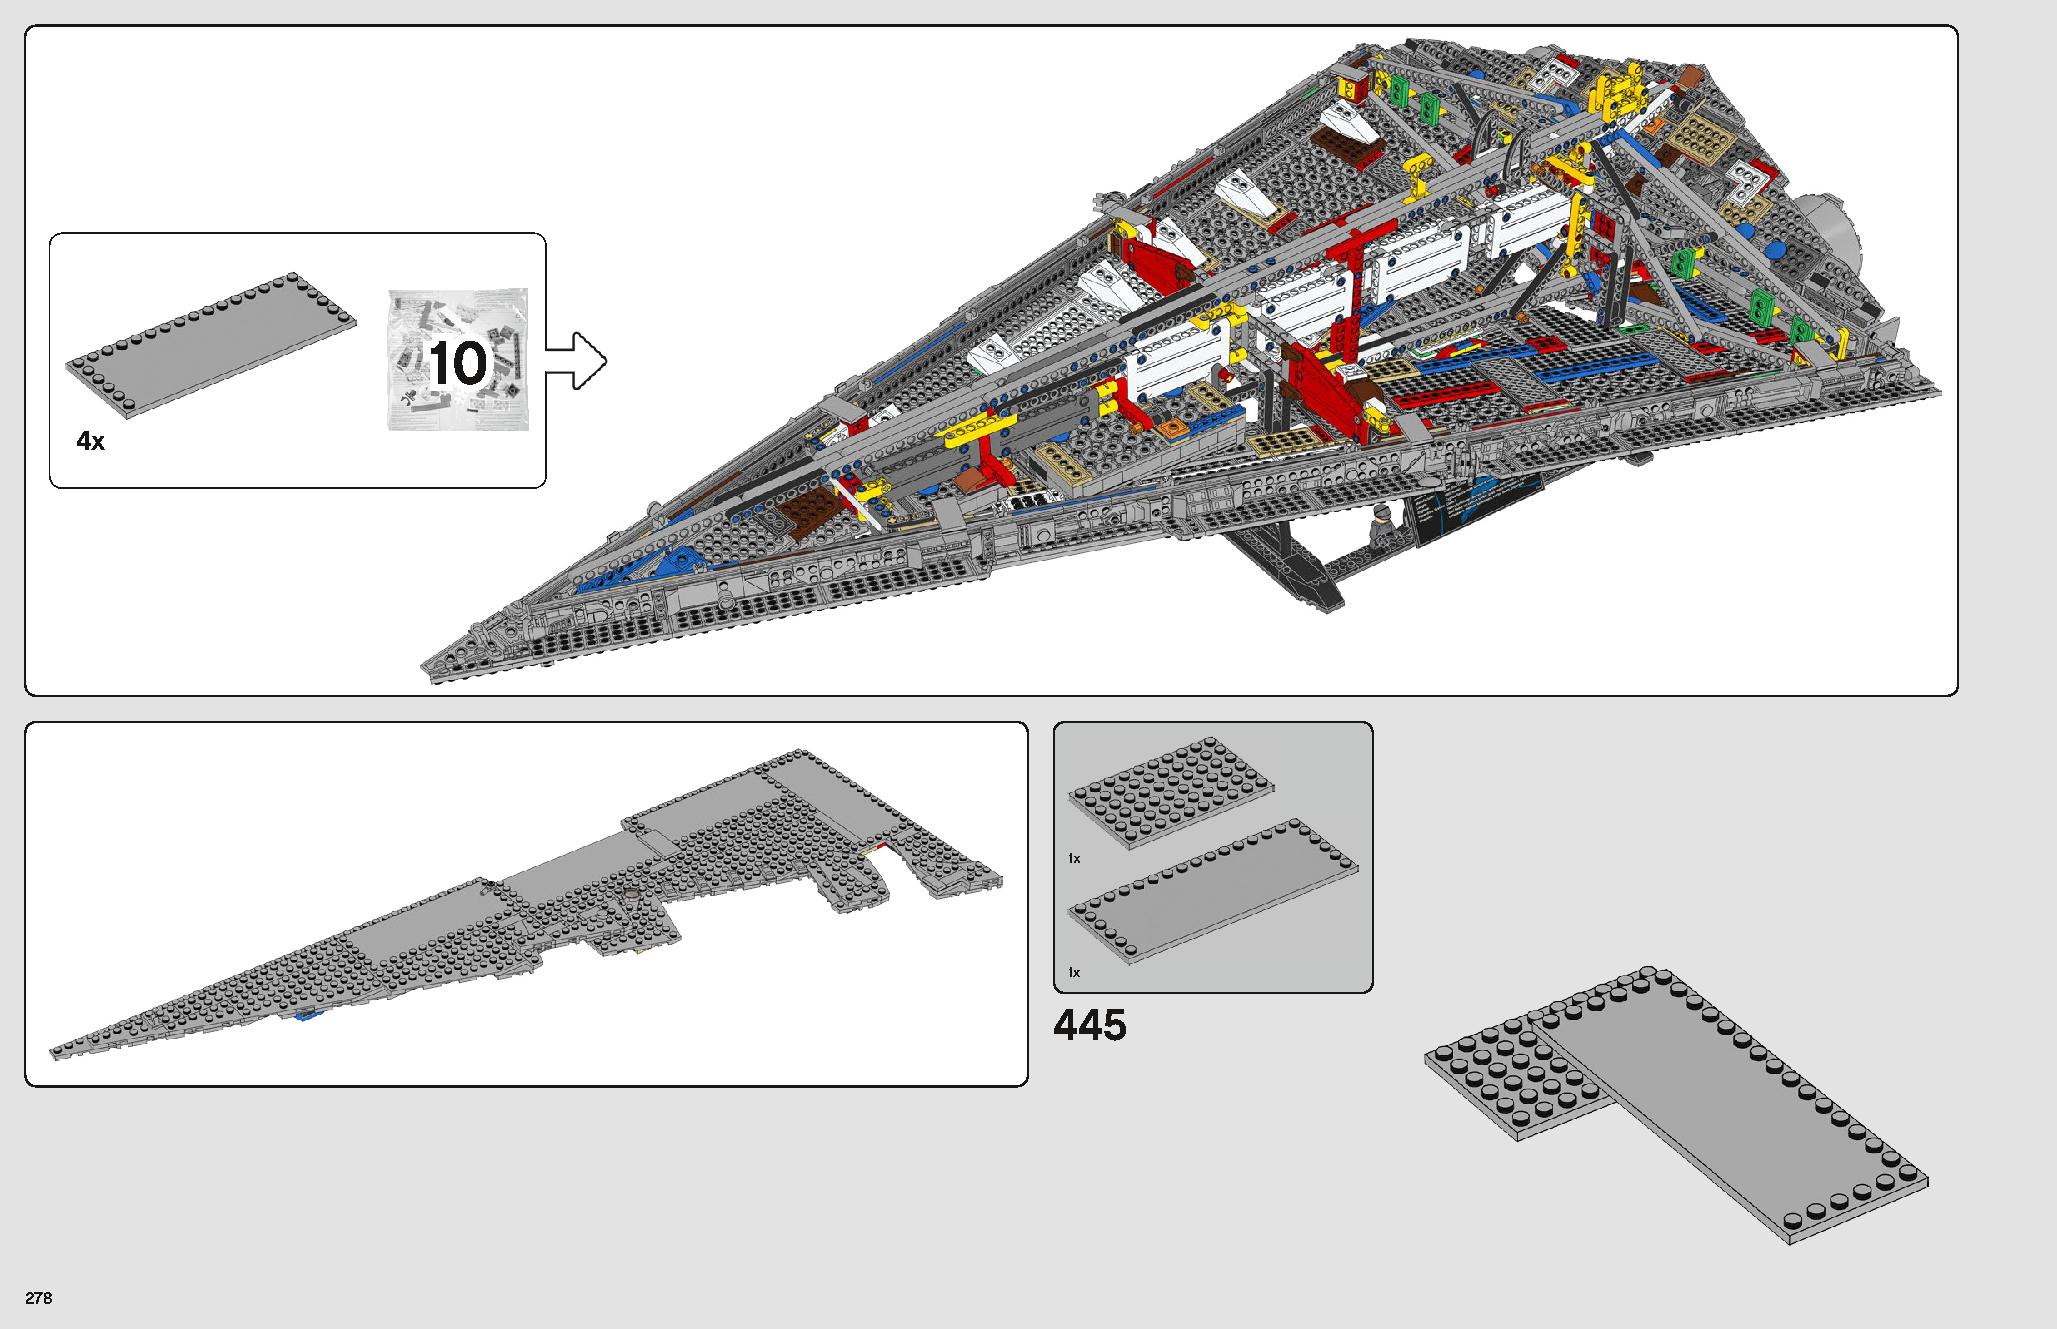 Imperial Star Destroyer 75252 レゴの商品情報 レゴの説明書・組立方法 278 page